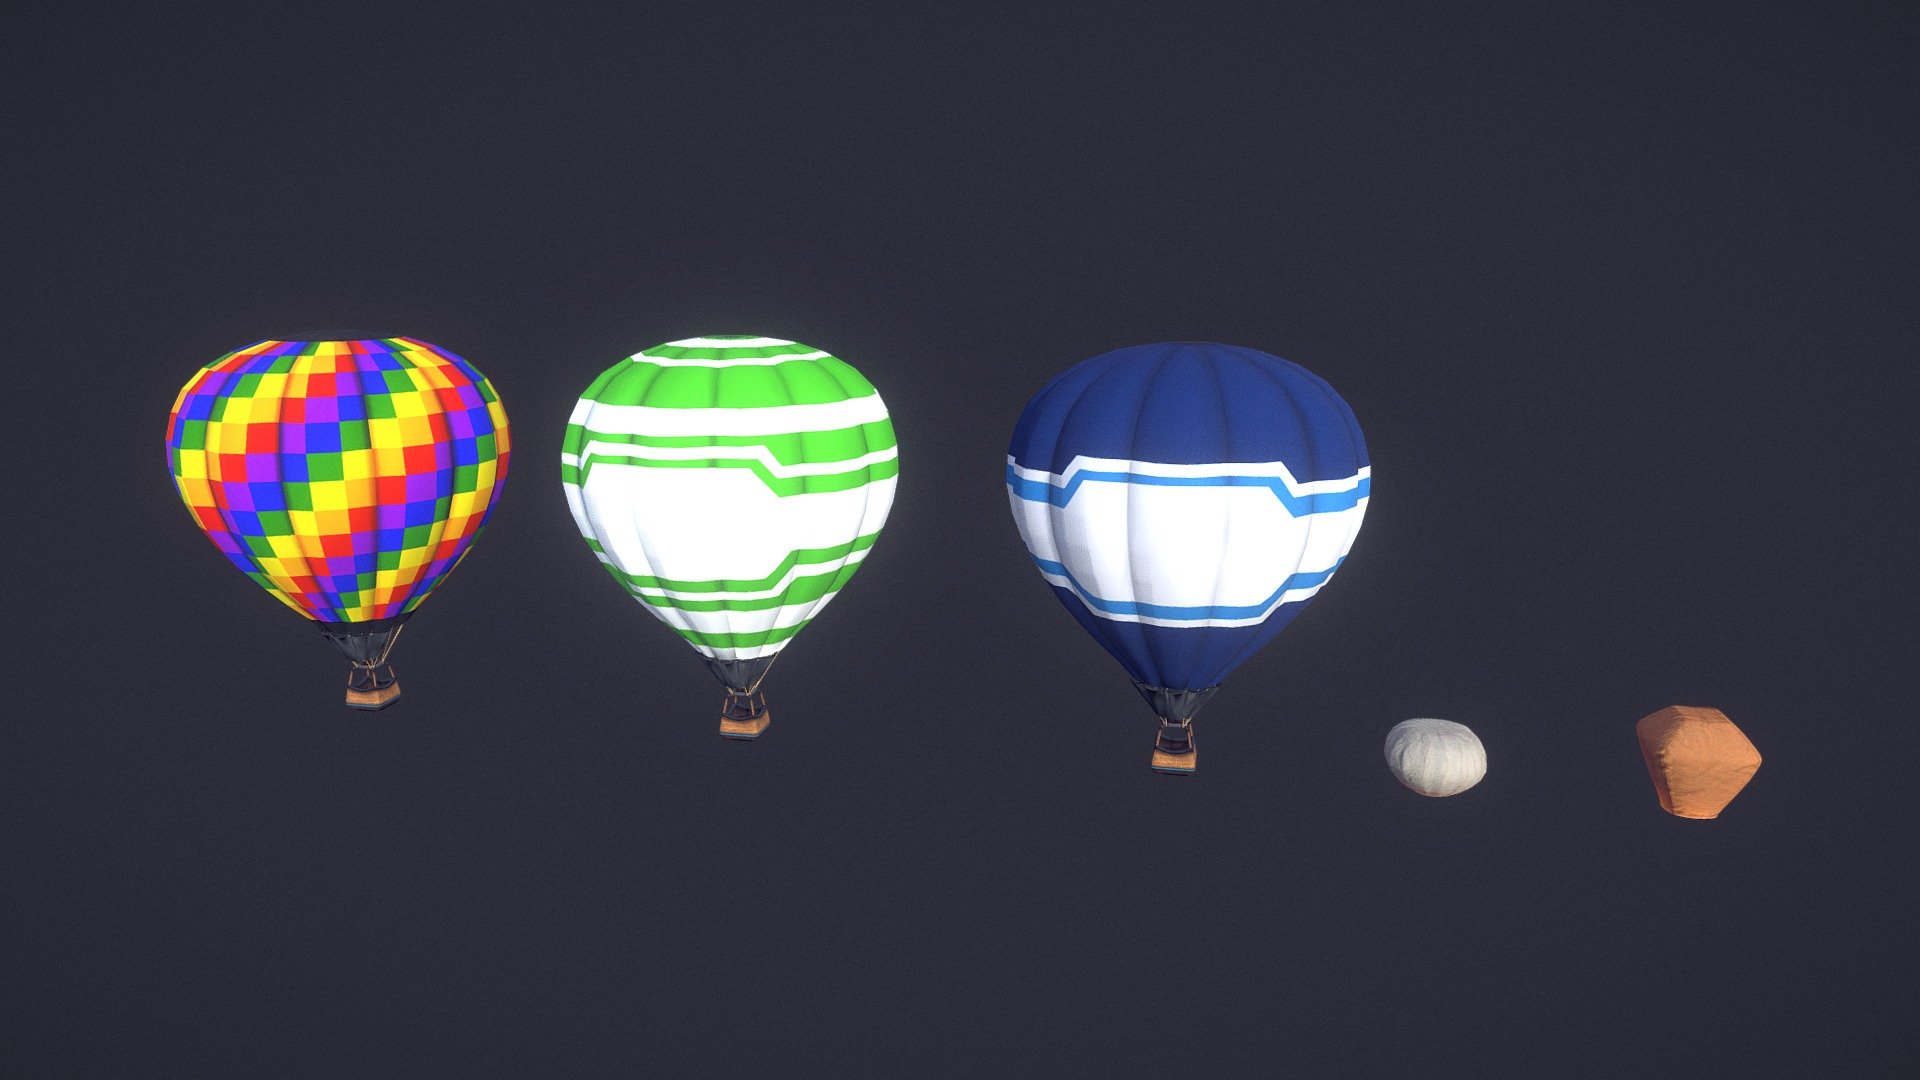 Balloon and lantern props for decorating your environment.

1 hot air balloon design with 3 sets of material textures, and two sets of animation to choose from. 

2 paper lantern designs.

Complete with flame effect.



Air Balloon

Polycount: 5204 Triangles

PNG Texture size: 2048 x 2048

( 3 Albedo, AO, 2 Normal, and Specular)

2 sets flat to filled air unity animation

2 sets idle unity animation

See link for animation: https://pse.is/4pn5yp

Sky Lantern A

Polycount: 1460 Triangles

PNG Texture size: 2048 x 2048

(Albedo, AO, Normal, Specular and Emission)

Sky Lantern B

Polycount: 1372 Triangles

PNG Texture size: 2048 x 2048

(Albedo, AO, Normal, Specular and Emission)

Balloon flame unity particle TGA: 256x256 - Modern Balloon Pack - Buy Royalty Free 3D model by Experience Lab Art (@Experience_Lab_Art) 3d model